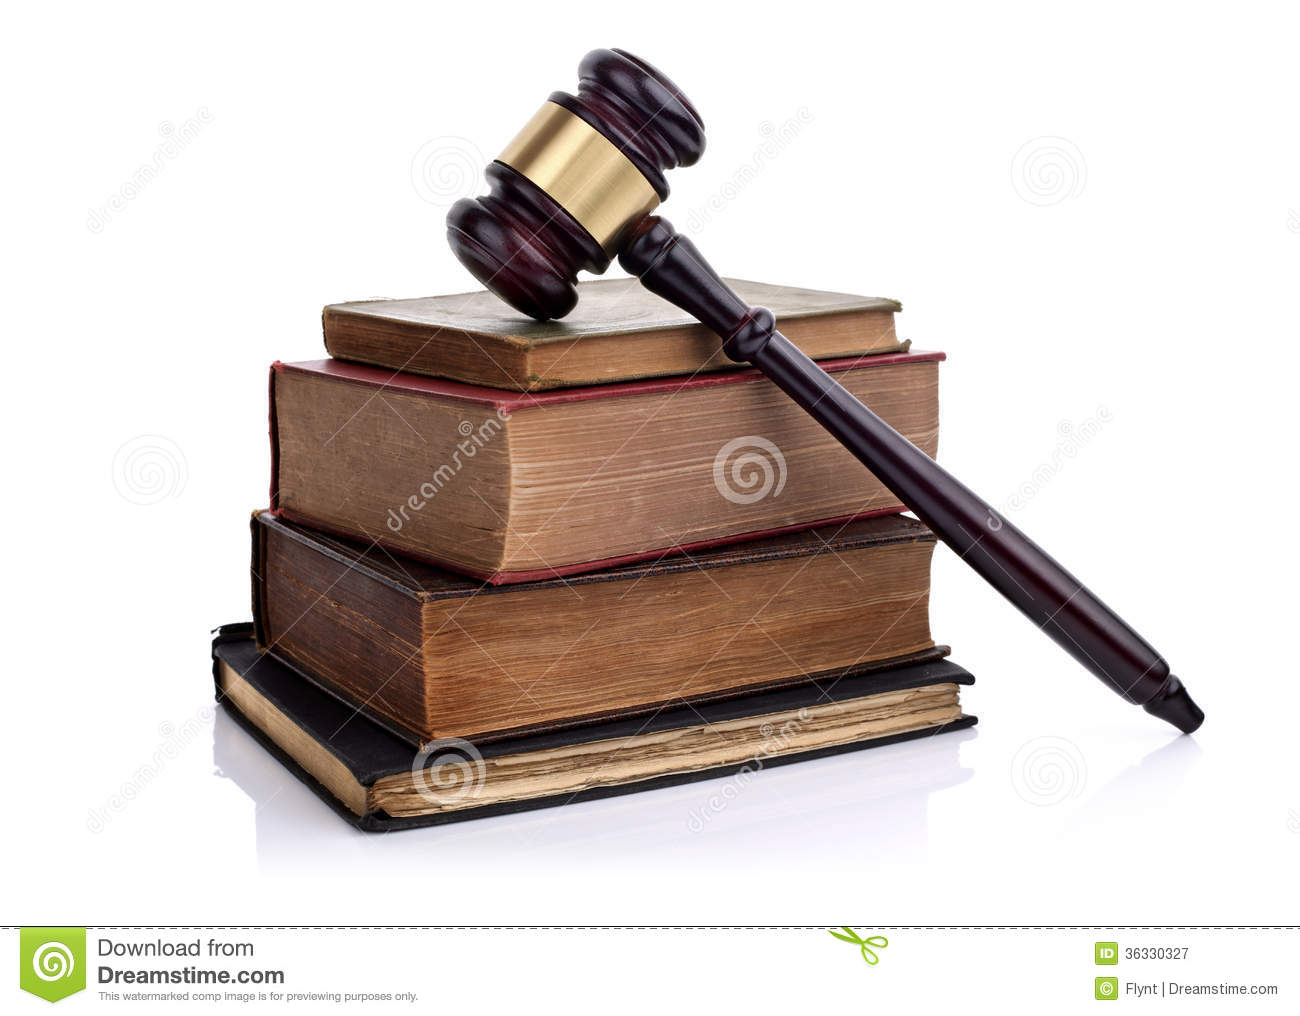 Gavel And Law Books Royalty Free Stock Photography   Image  36330327